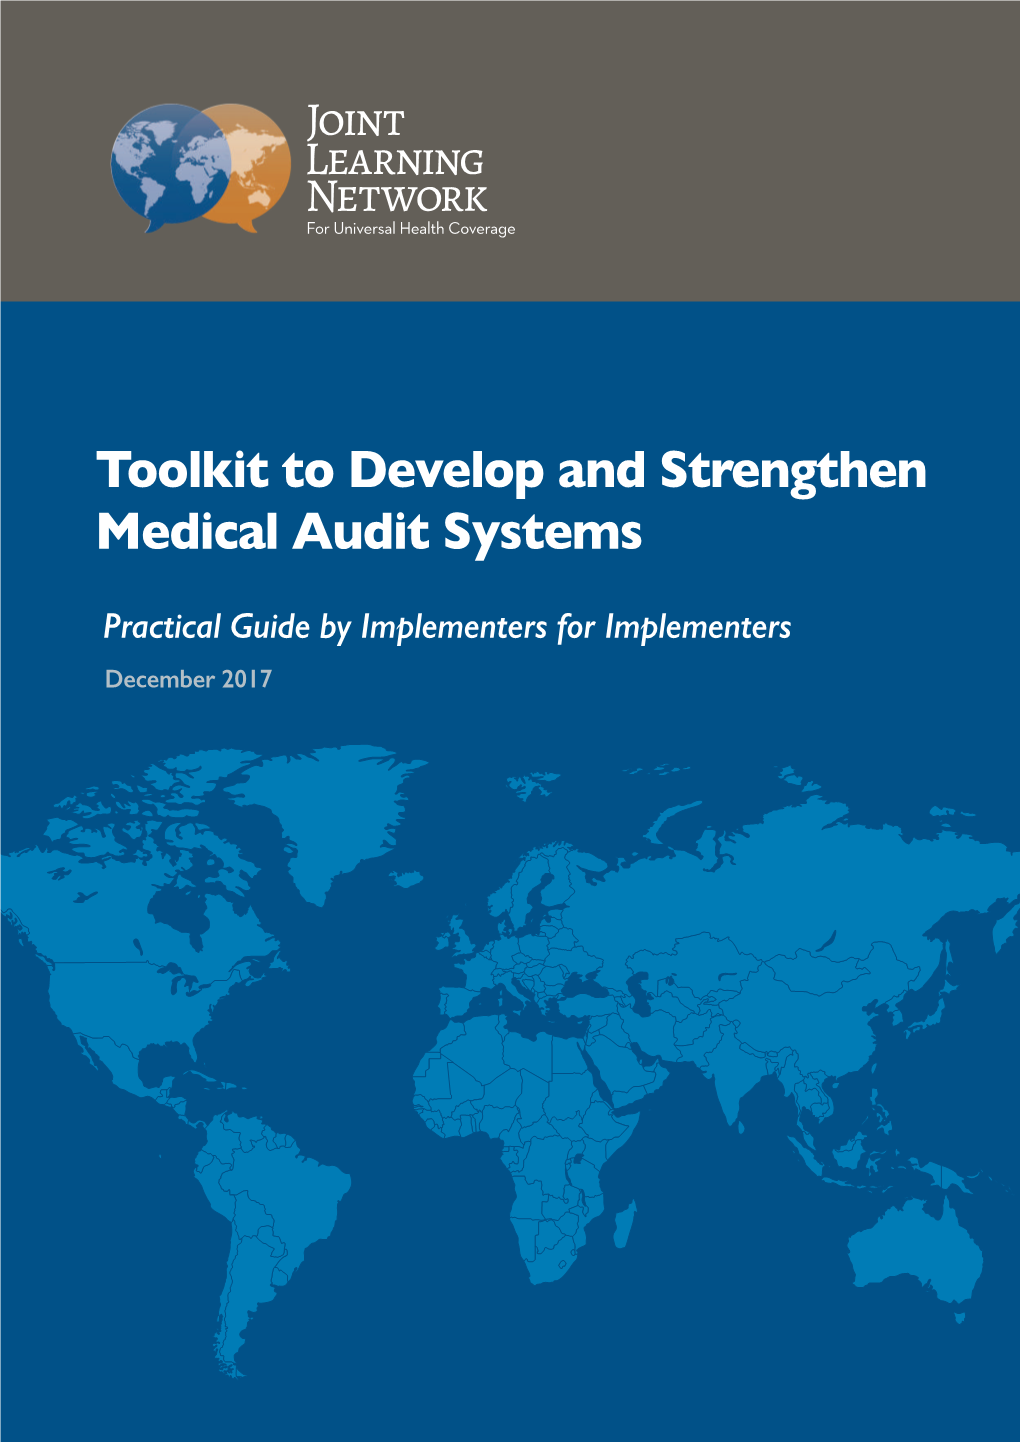 Toolkit to Develop and Strengthen Medical Audit Systems